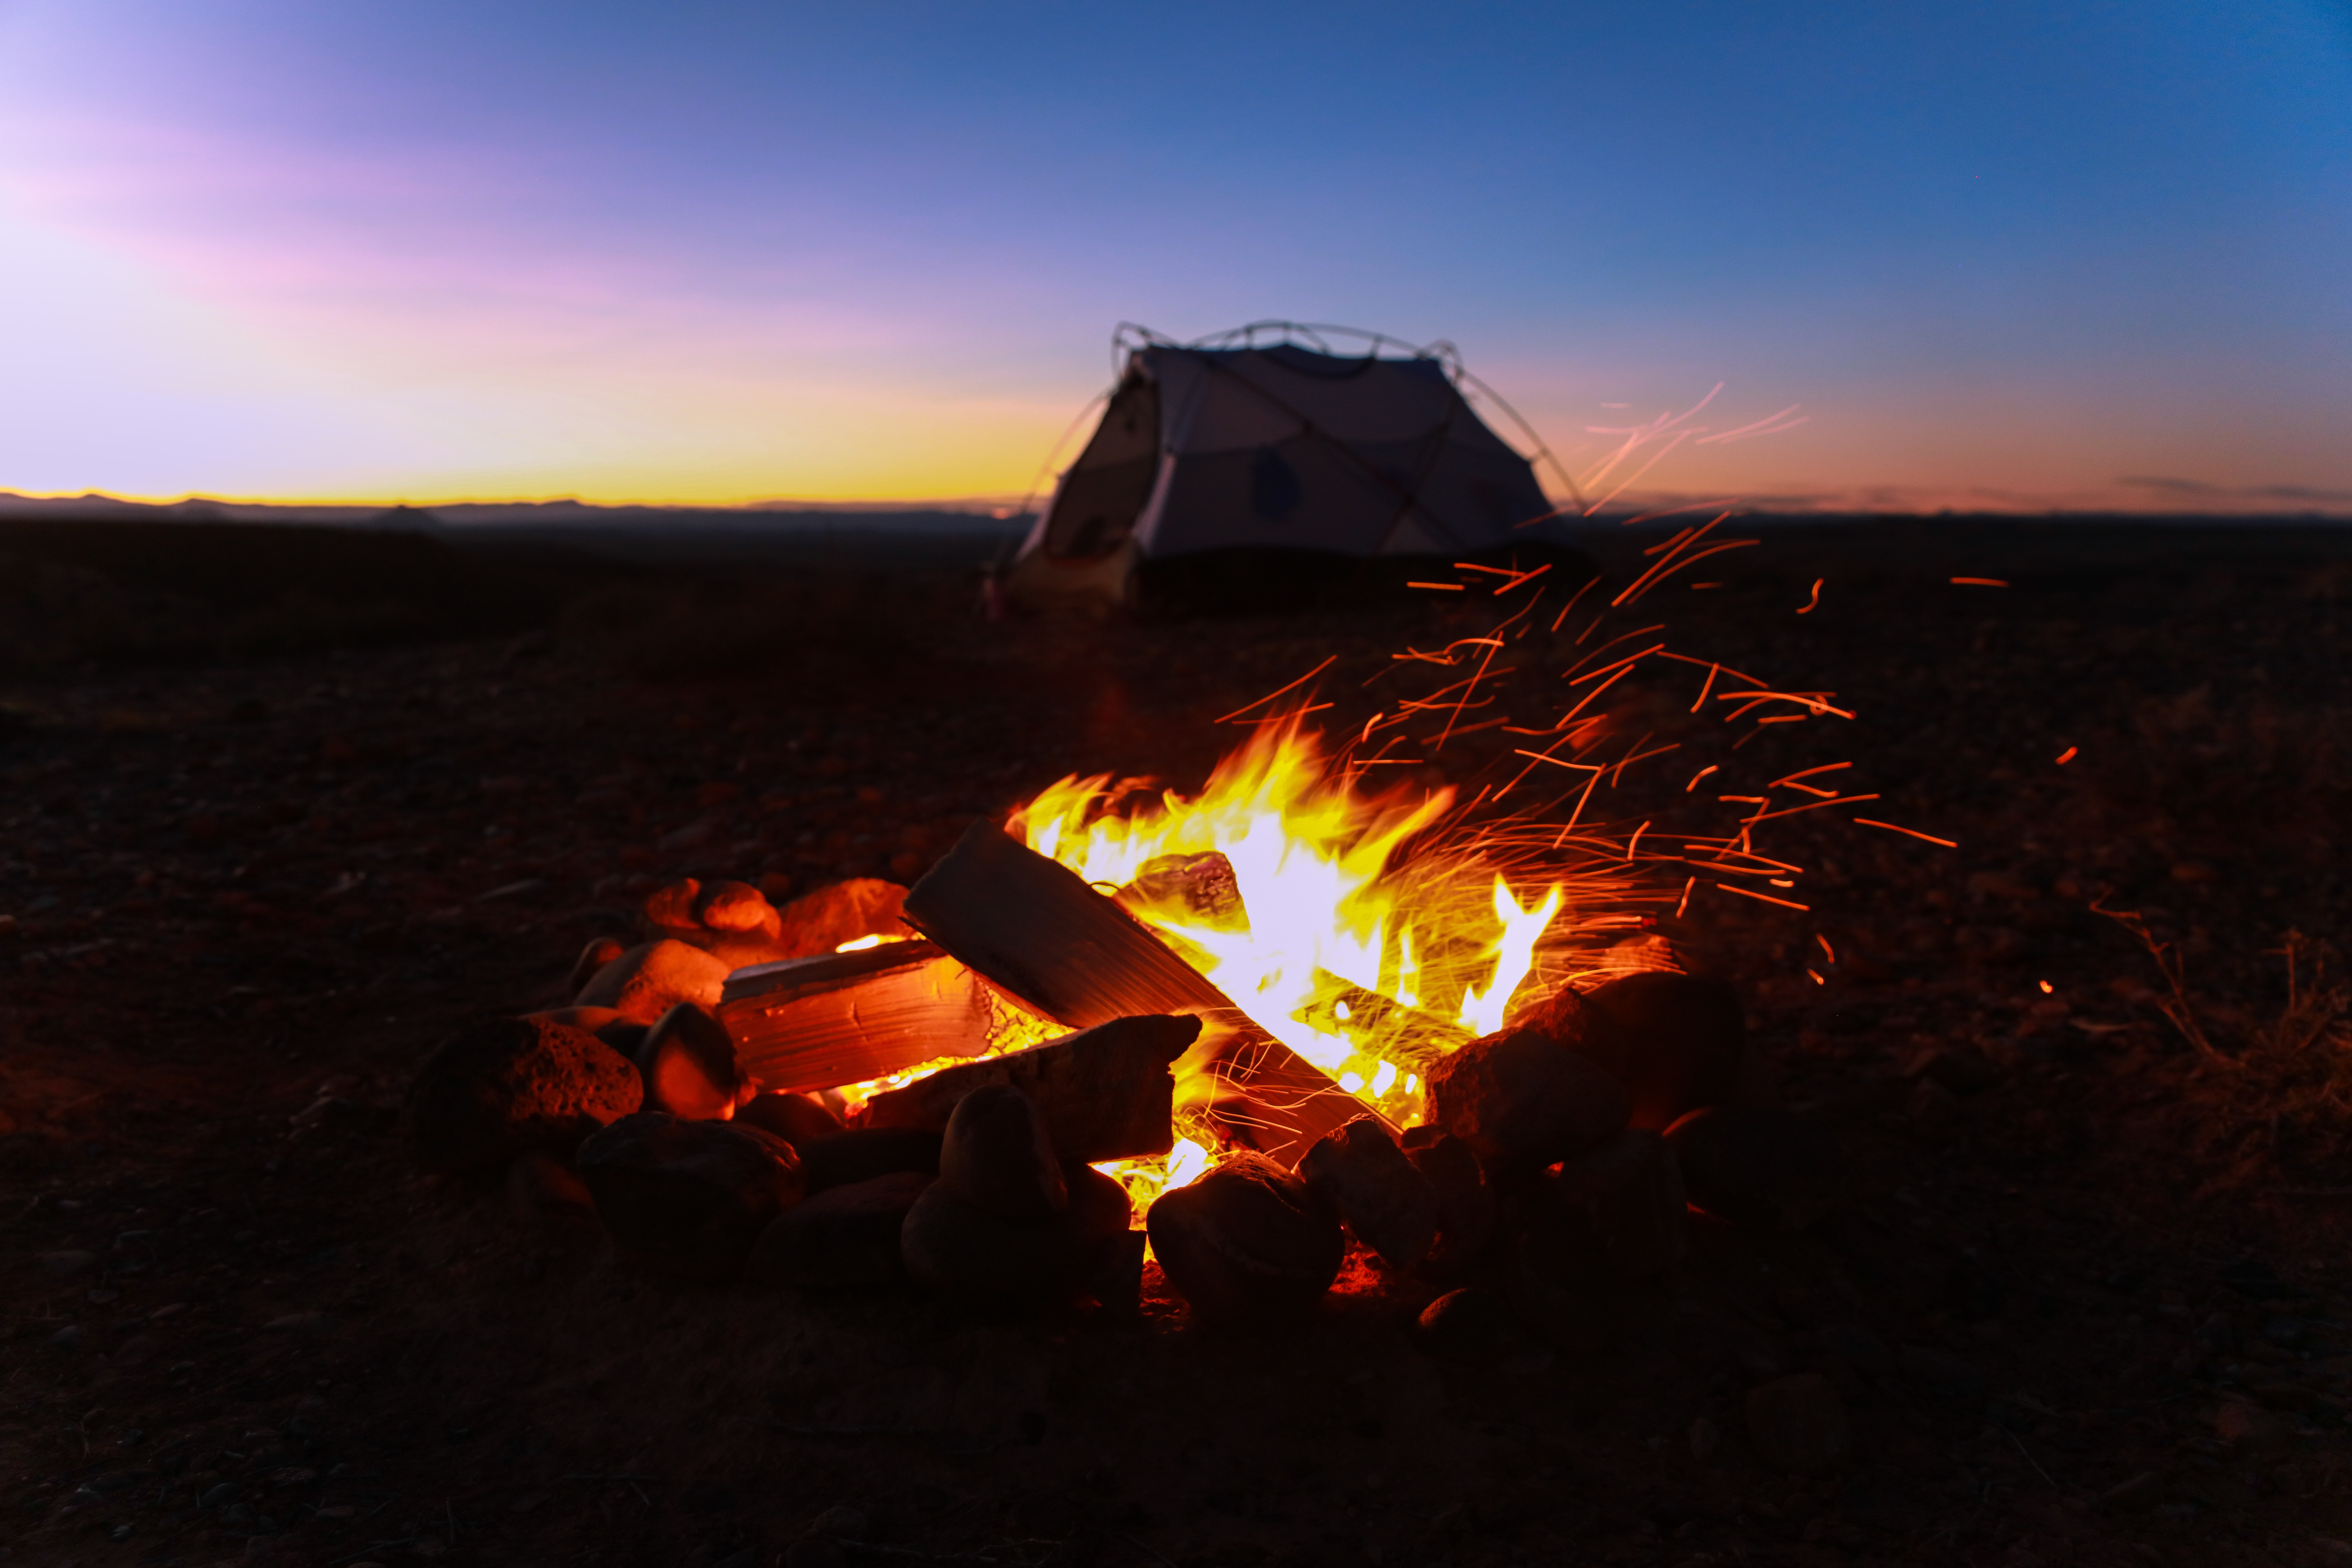 Campfire at a Campsite by Patrick Hendry